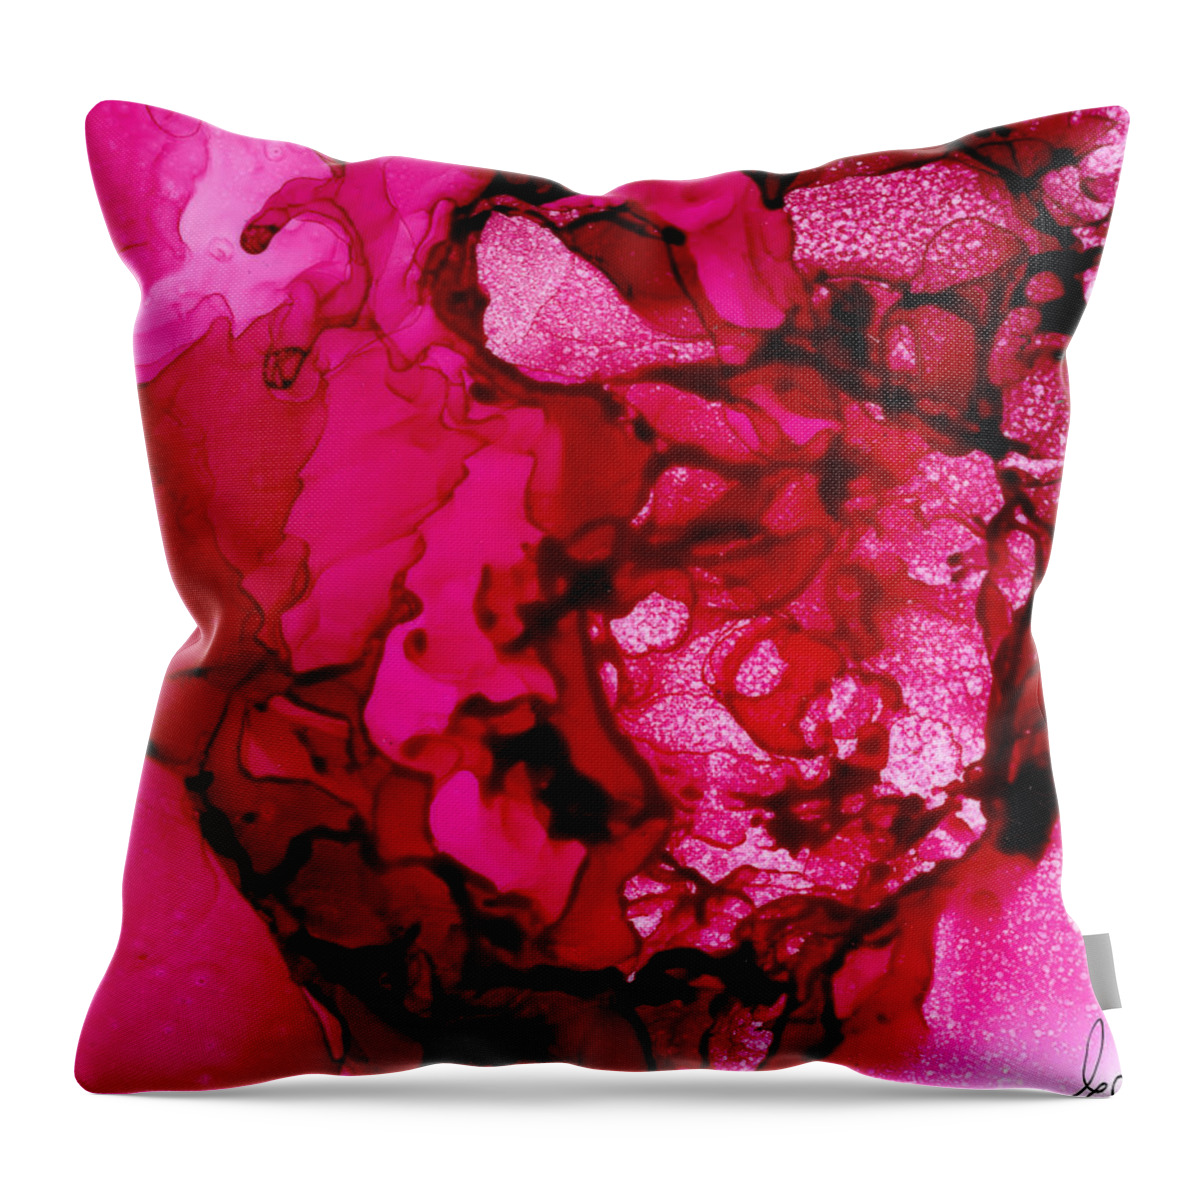 Hot Pink Peony Throw Pillow featuring the painting Hot Pink Peony by Daniela Easter